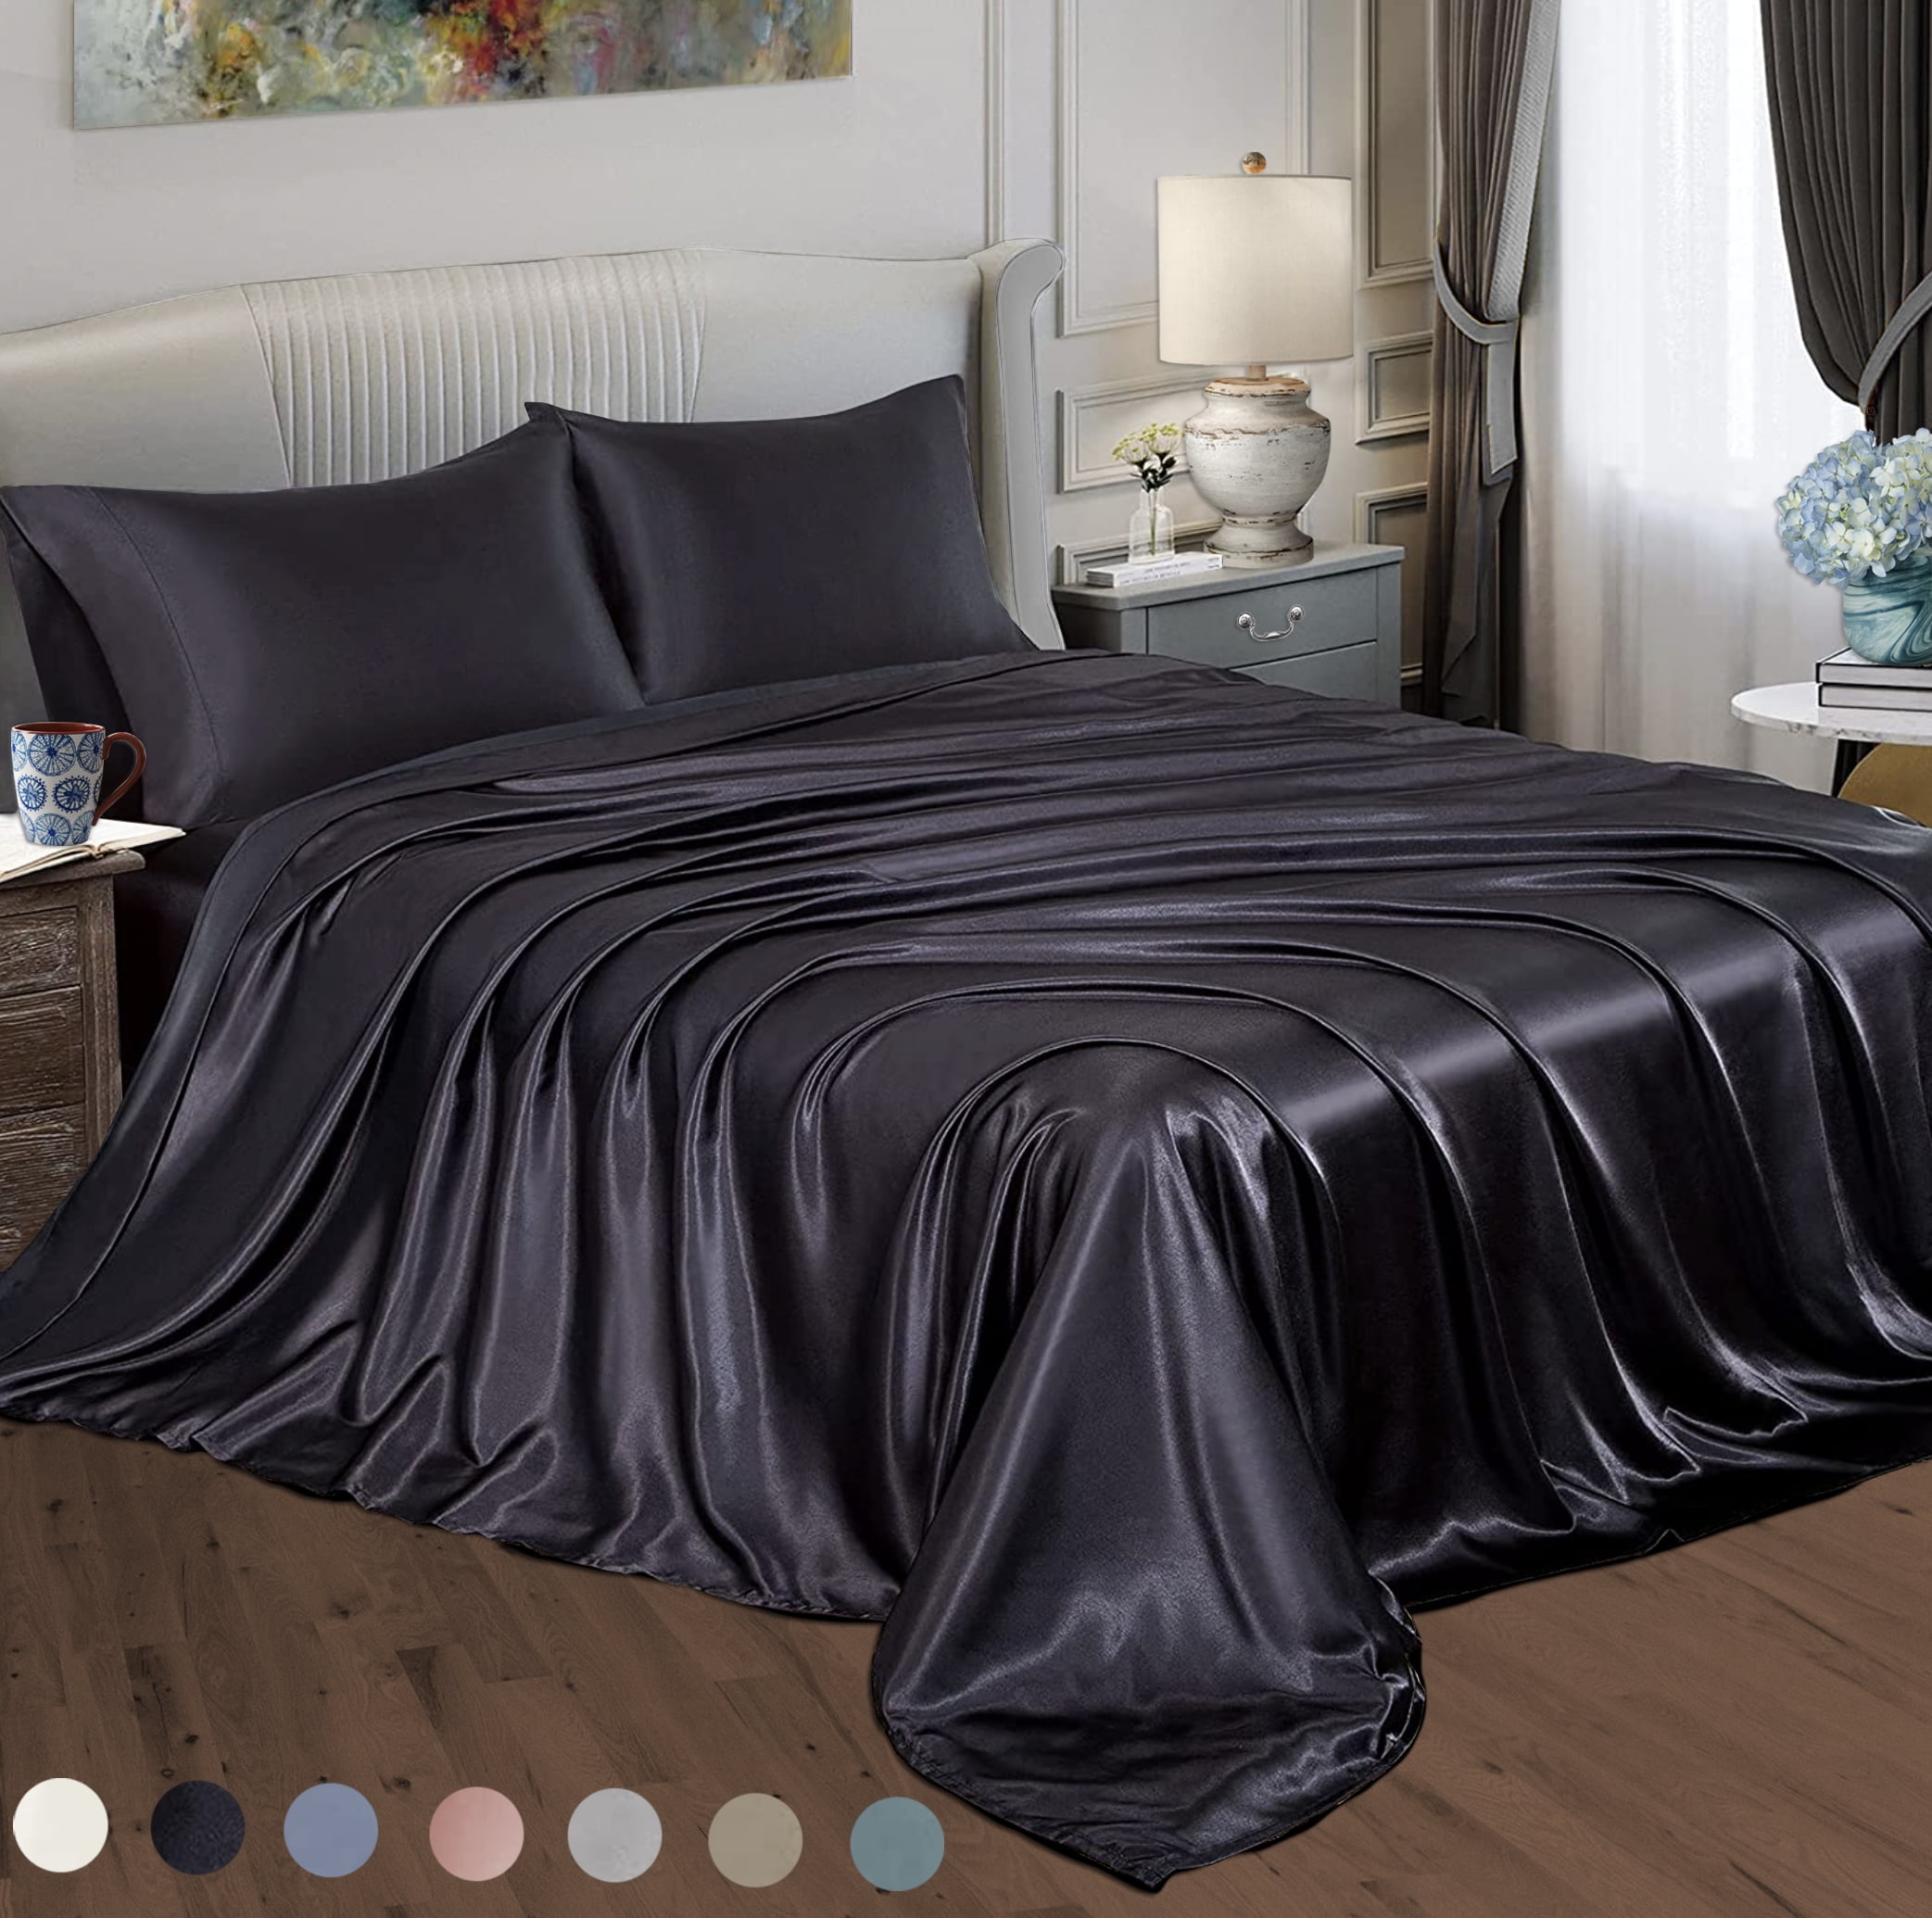 LOVE TM Luxury Soft Silky Satin Fitted Sheet 12 Inch Deep Pocket King Size,Black 